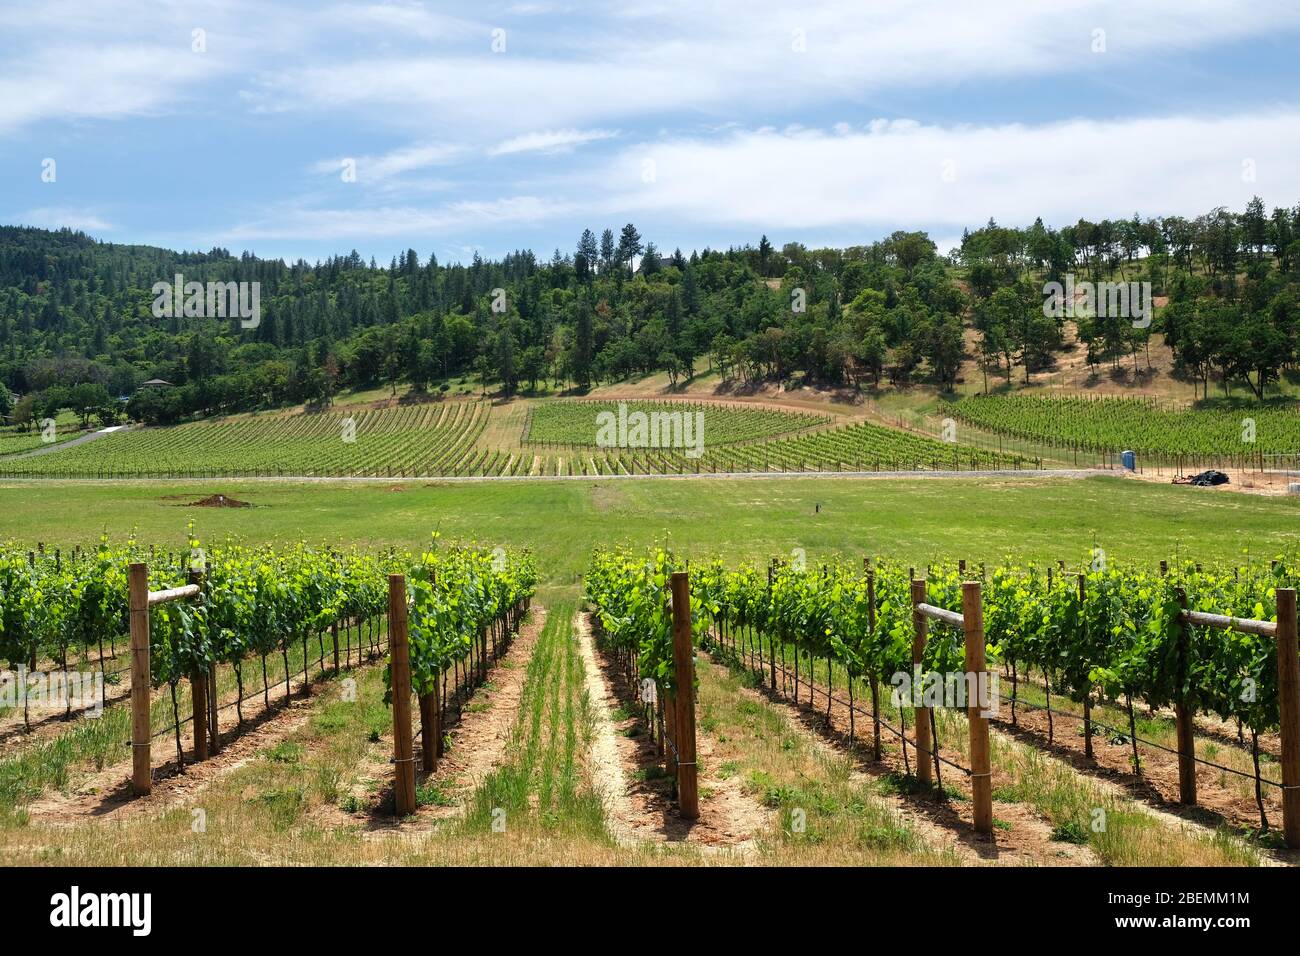 Rows of wine vines in a Rogue Valley AVA vineyard in Southern Oregon near Medford landscapes Stock Photo